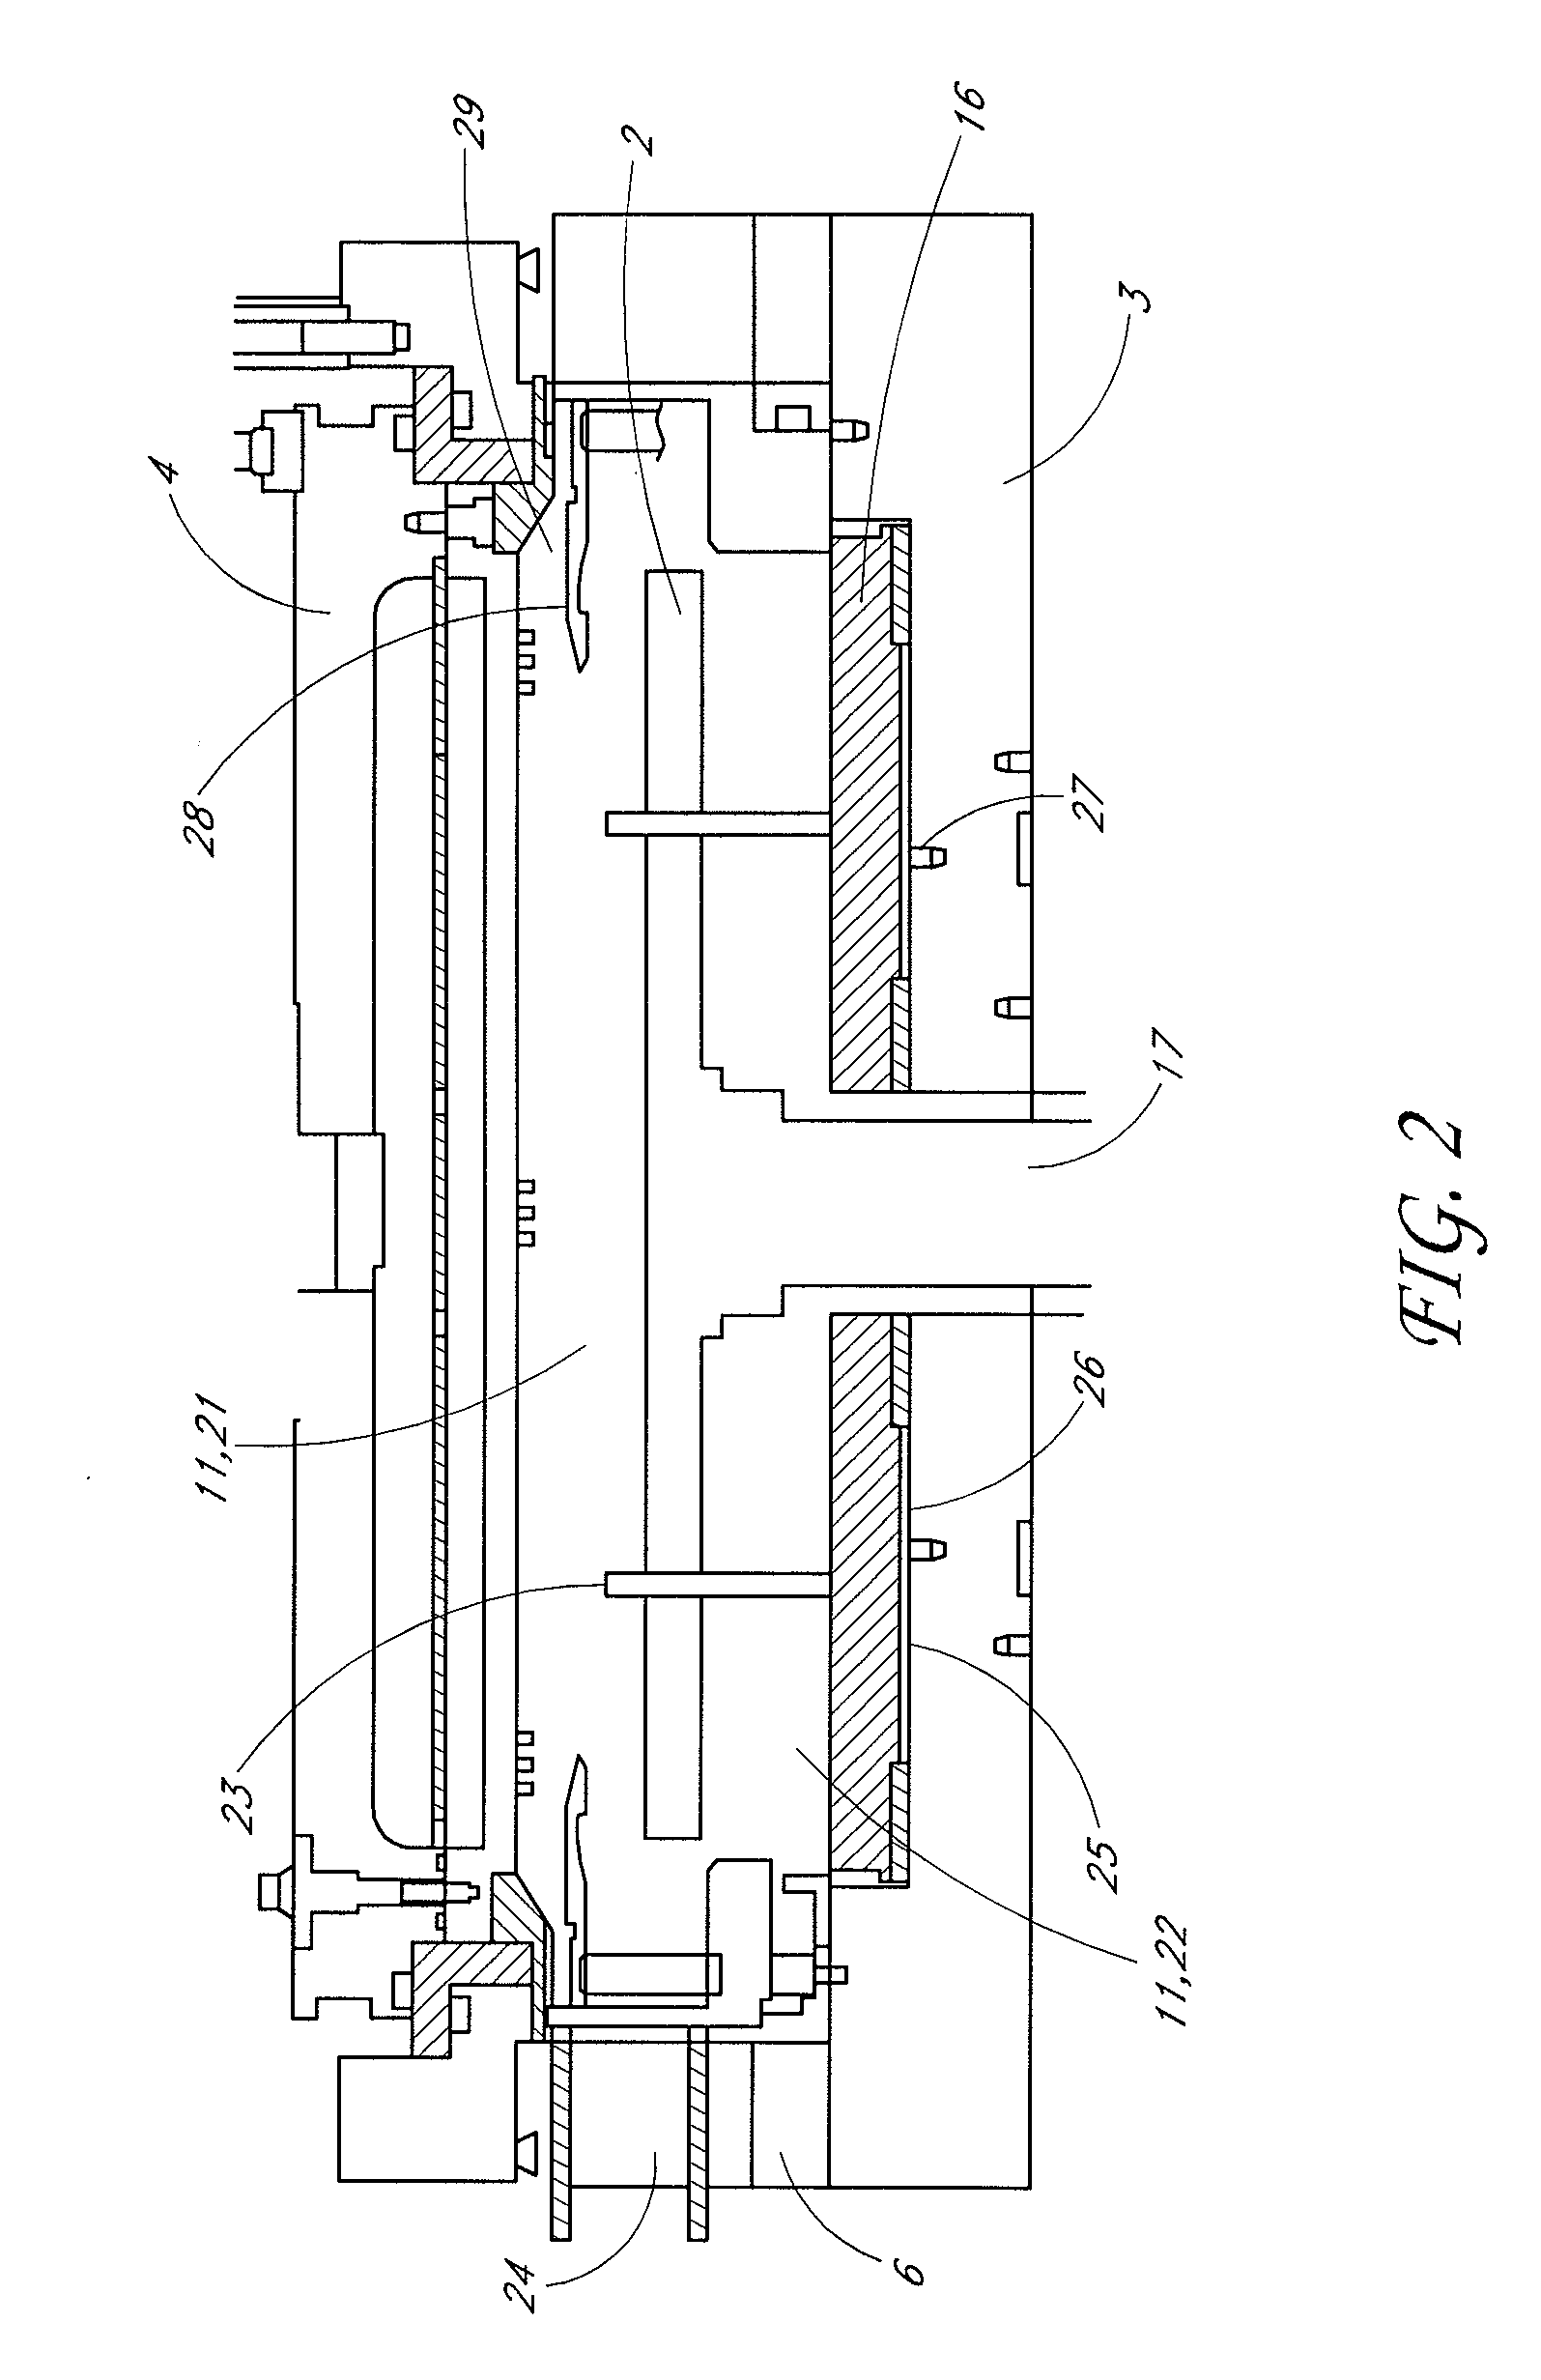 Apparatus and method for improving production throughput in CVD chamber